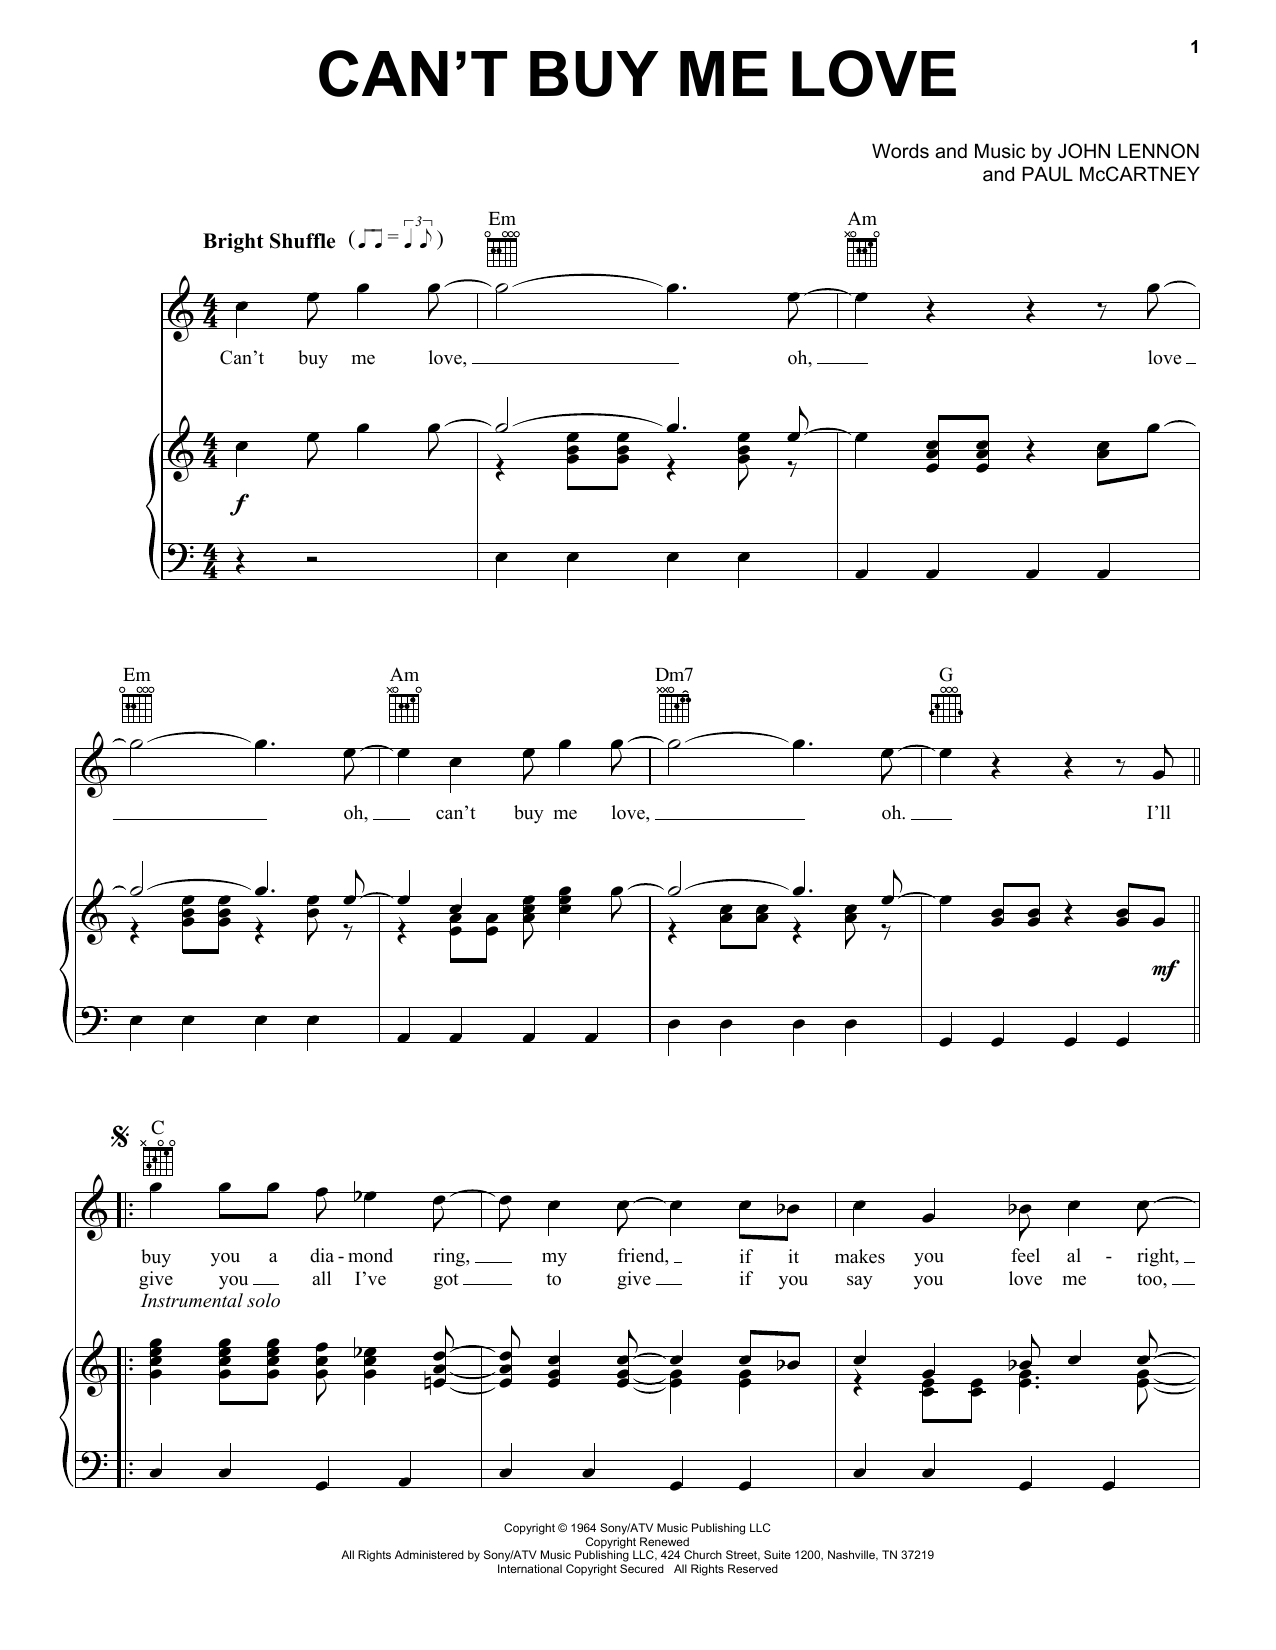 The Beatles Can't Buy Me Love sheet music notes printable PDF score